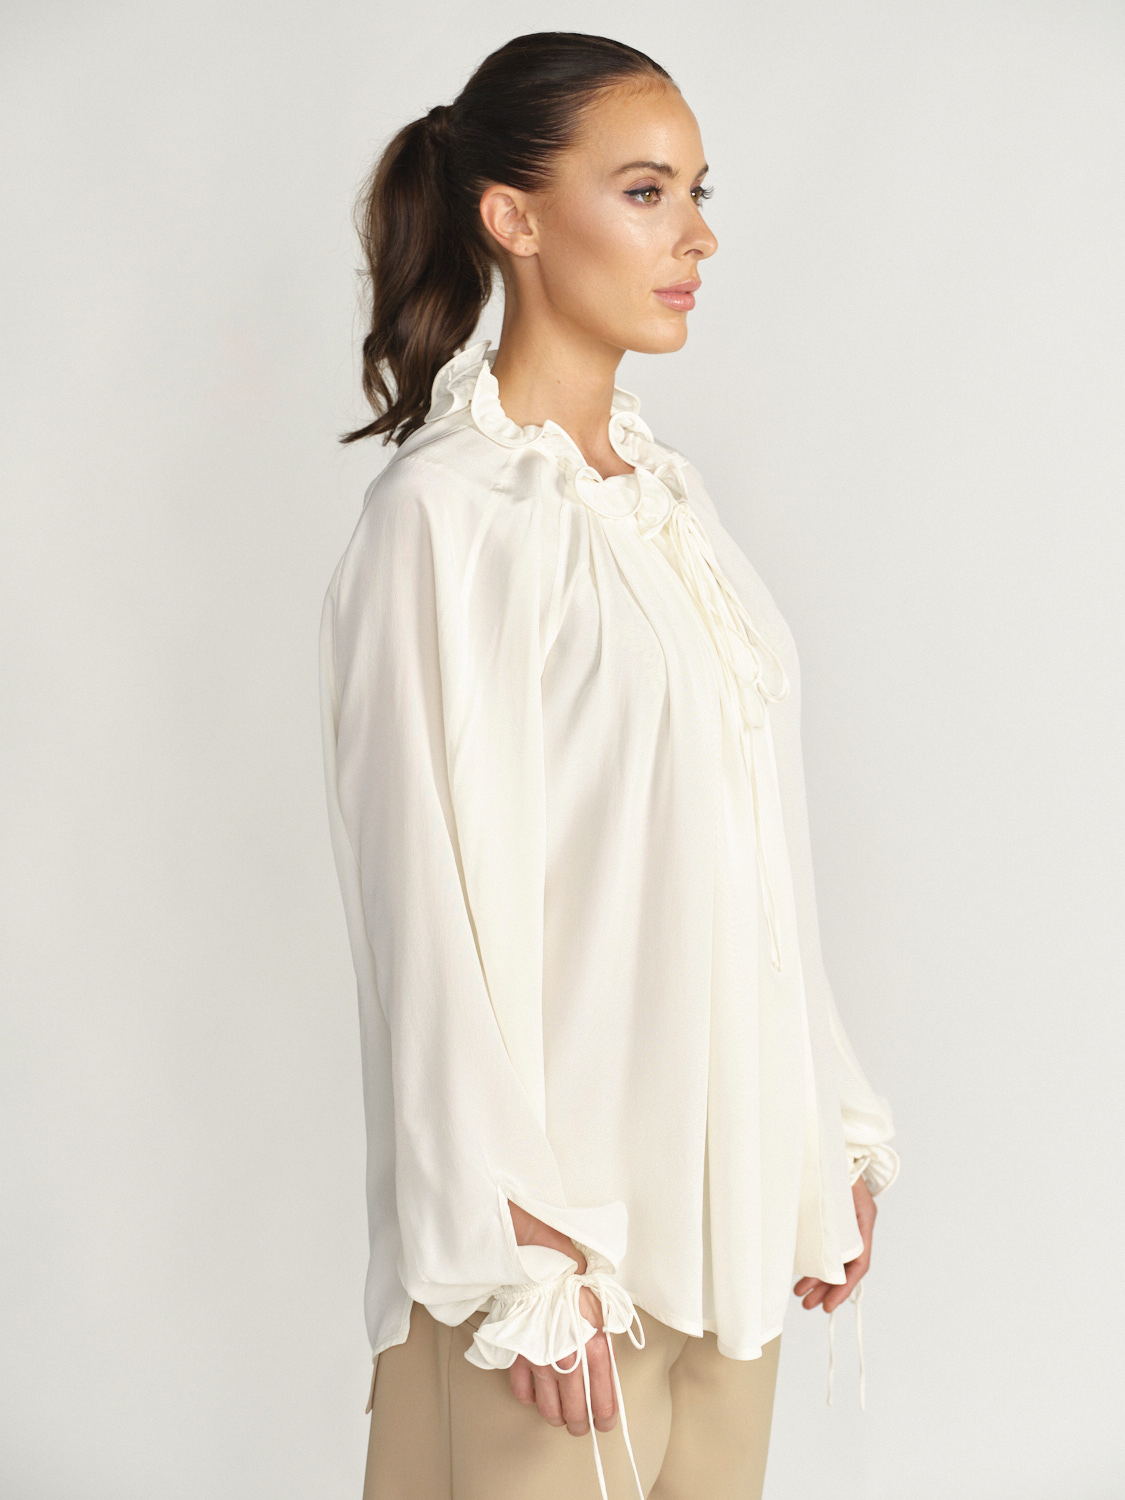 Victoria Beckham Ruched Detail Blouse - Long Sleeve Blouse with Ruched Details made of Silk white 36